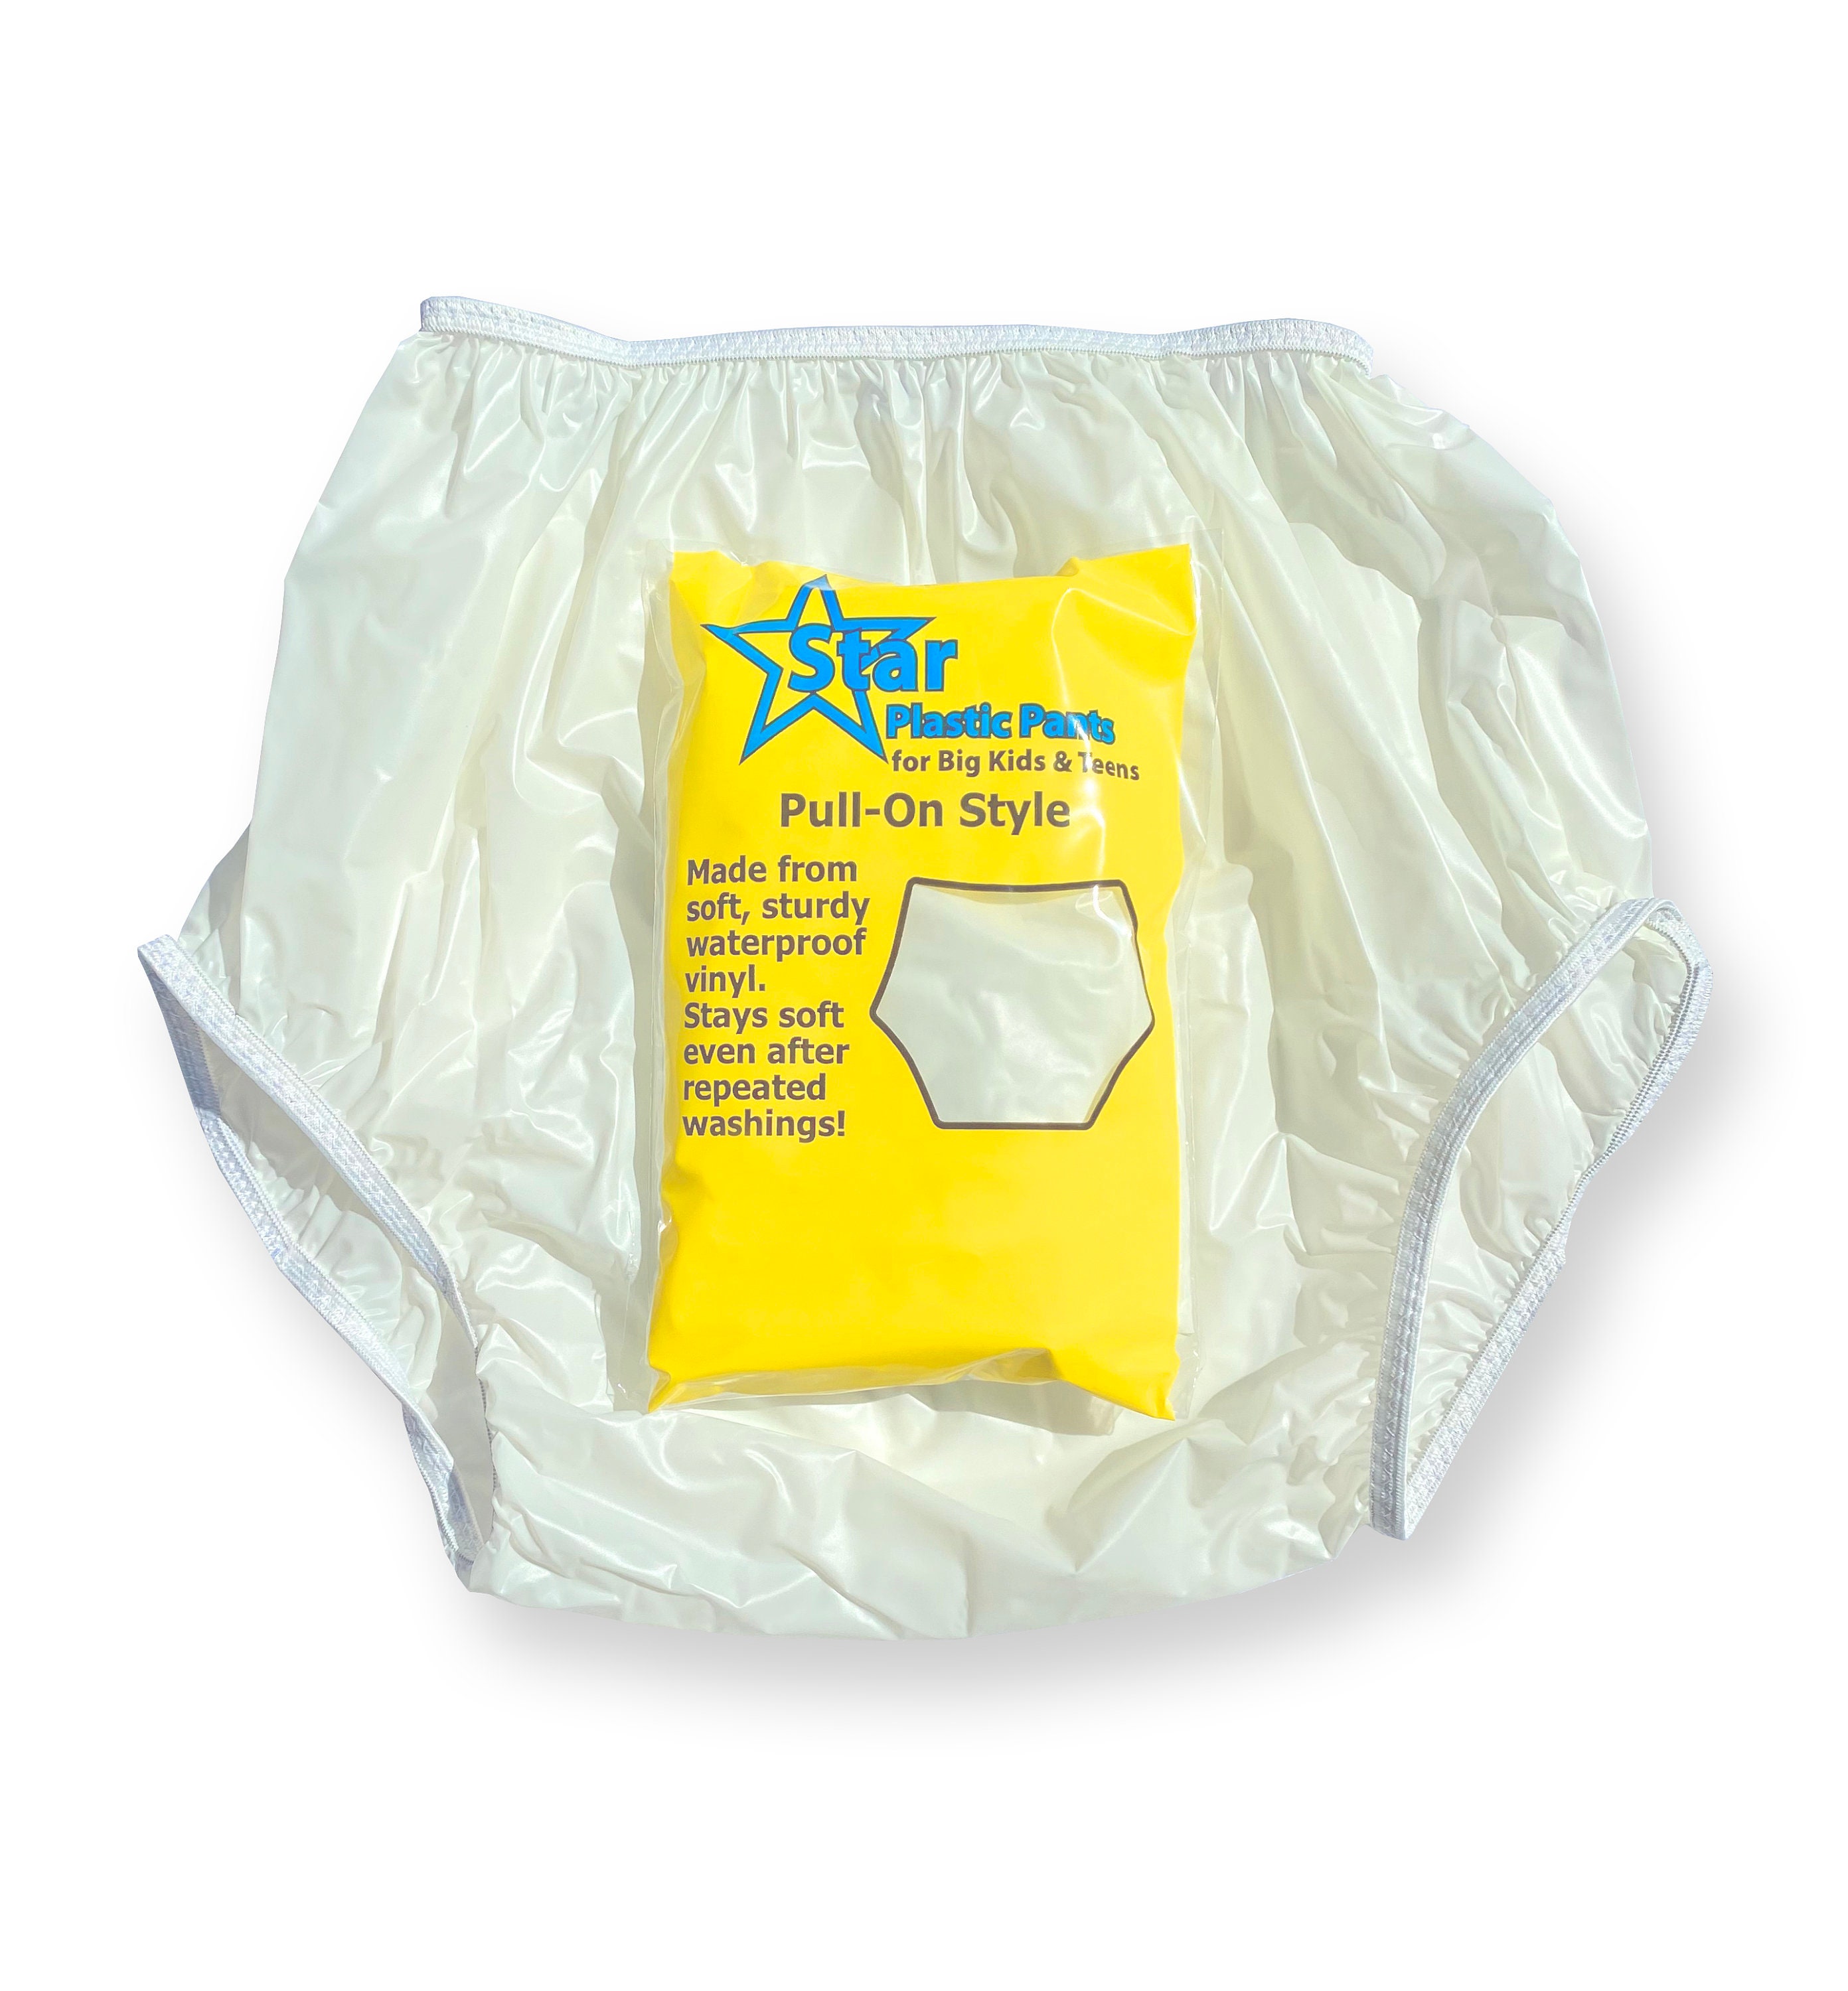 PVC rubber pants as slip-on pants for cloth nappies